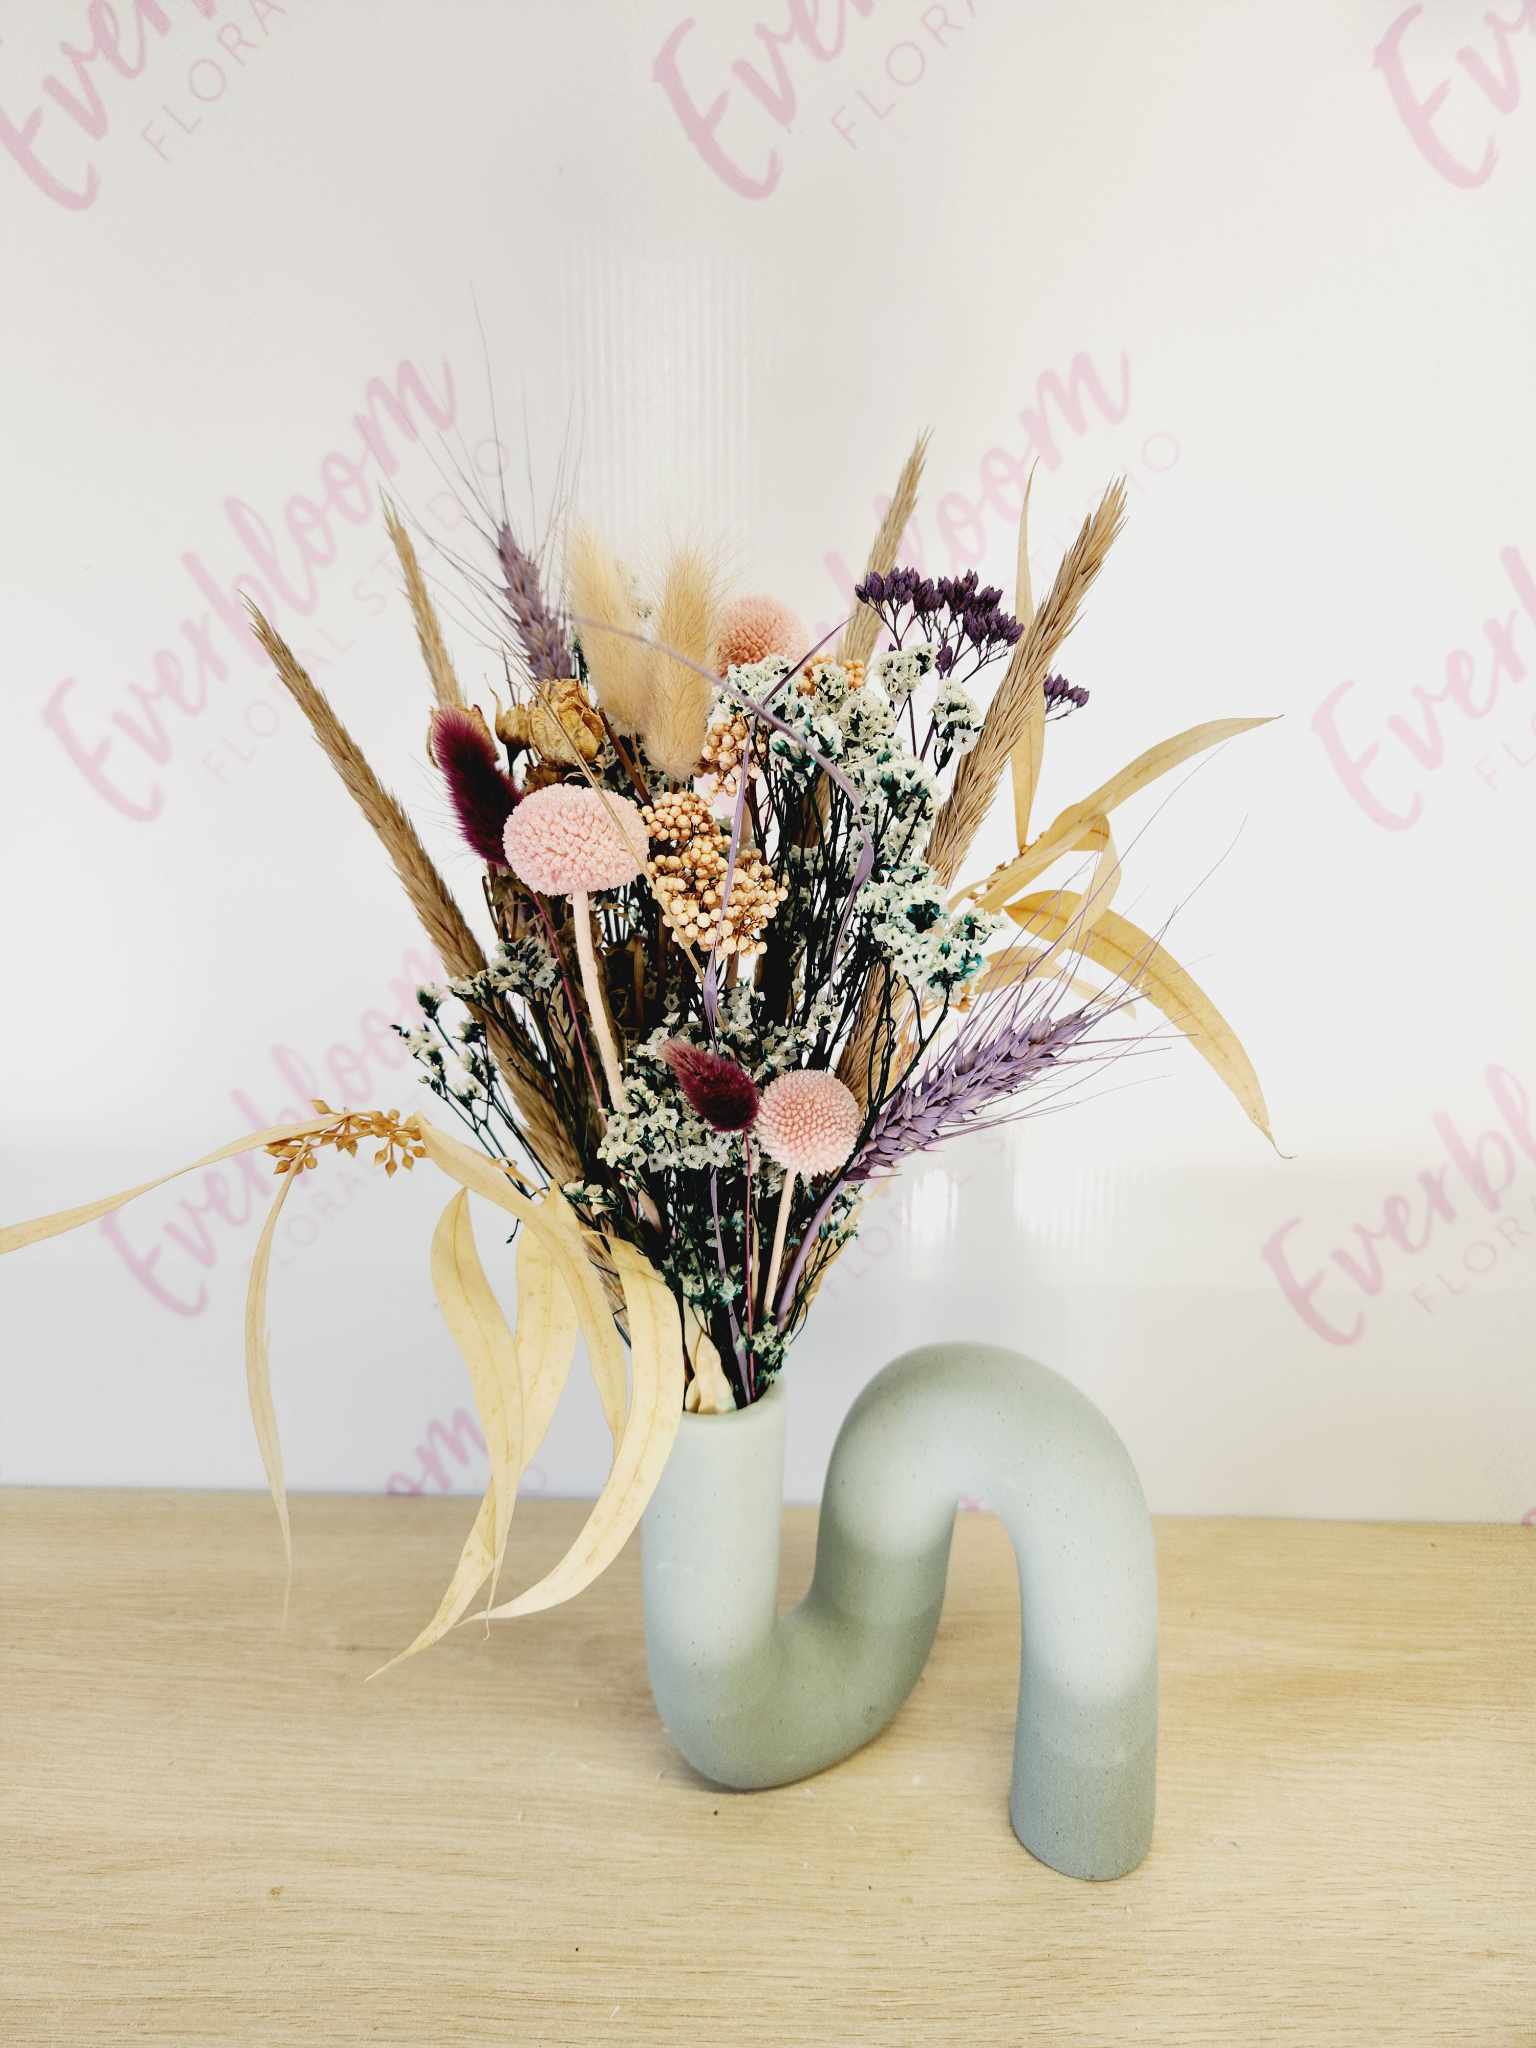 Dried flower arrangements and bouquets are a customer fave. Everbloom floral studio can custom make something special for you. Dried flower arrangements are made in ceramic designer vases. Delivered locally same day to Tauranga, papamoa and Mount Maunganui direct from our florist.